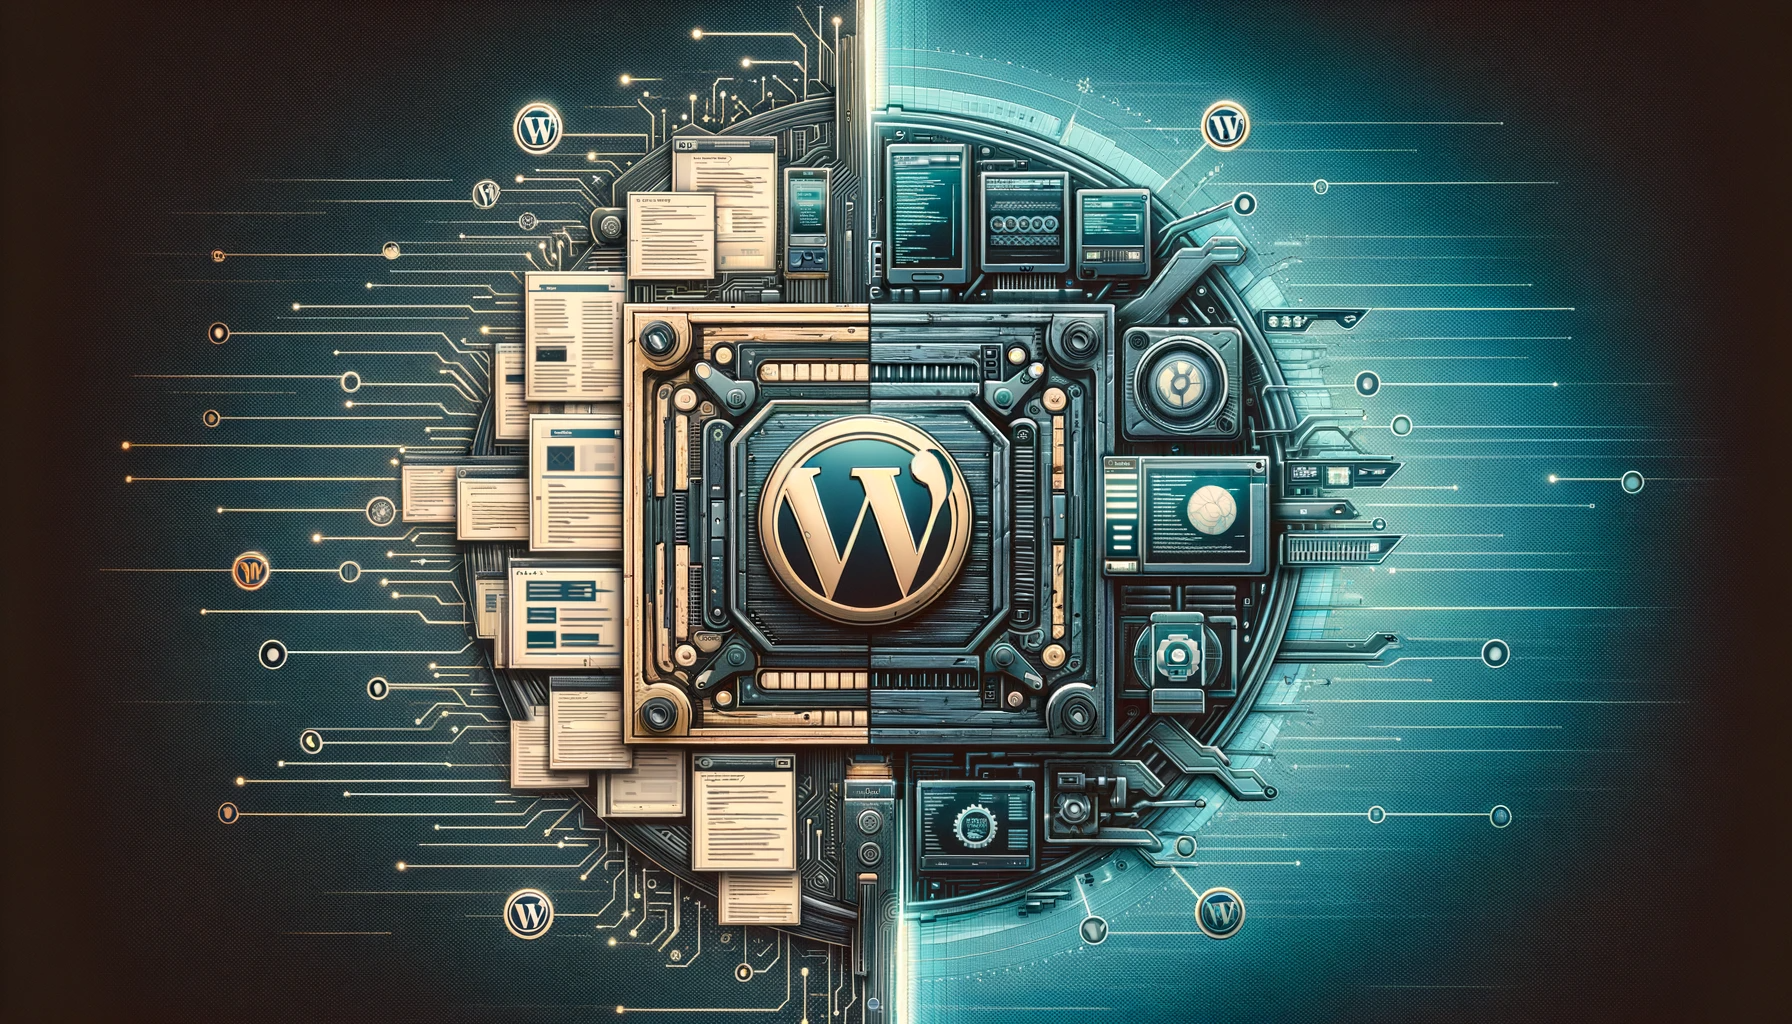 Digital illustration showing the evolution of WordPress: on the left, a vintage-style blogging interface symbolizing WordPress's early days as a blogging platform; on the right, a modern web development interface with advanced coding elements, representing its current status as a web development powerhouse. The WordPress logo is centrally featured, seamlessly connecting the two eras.